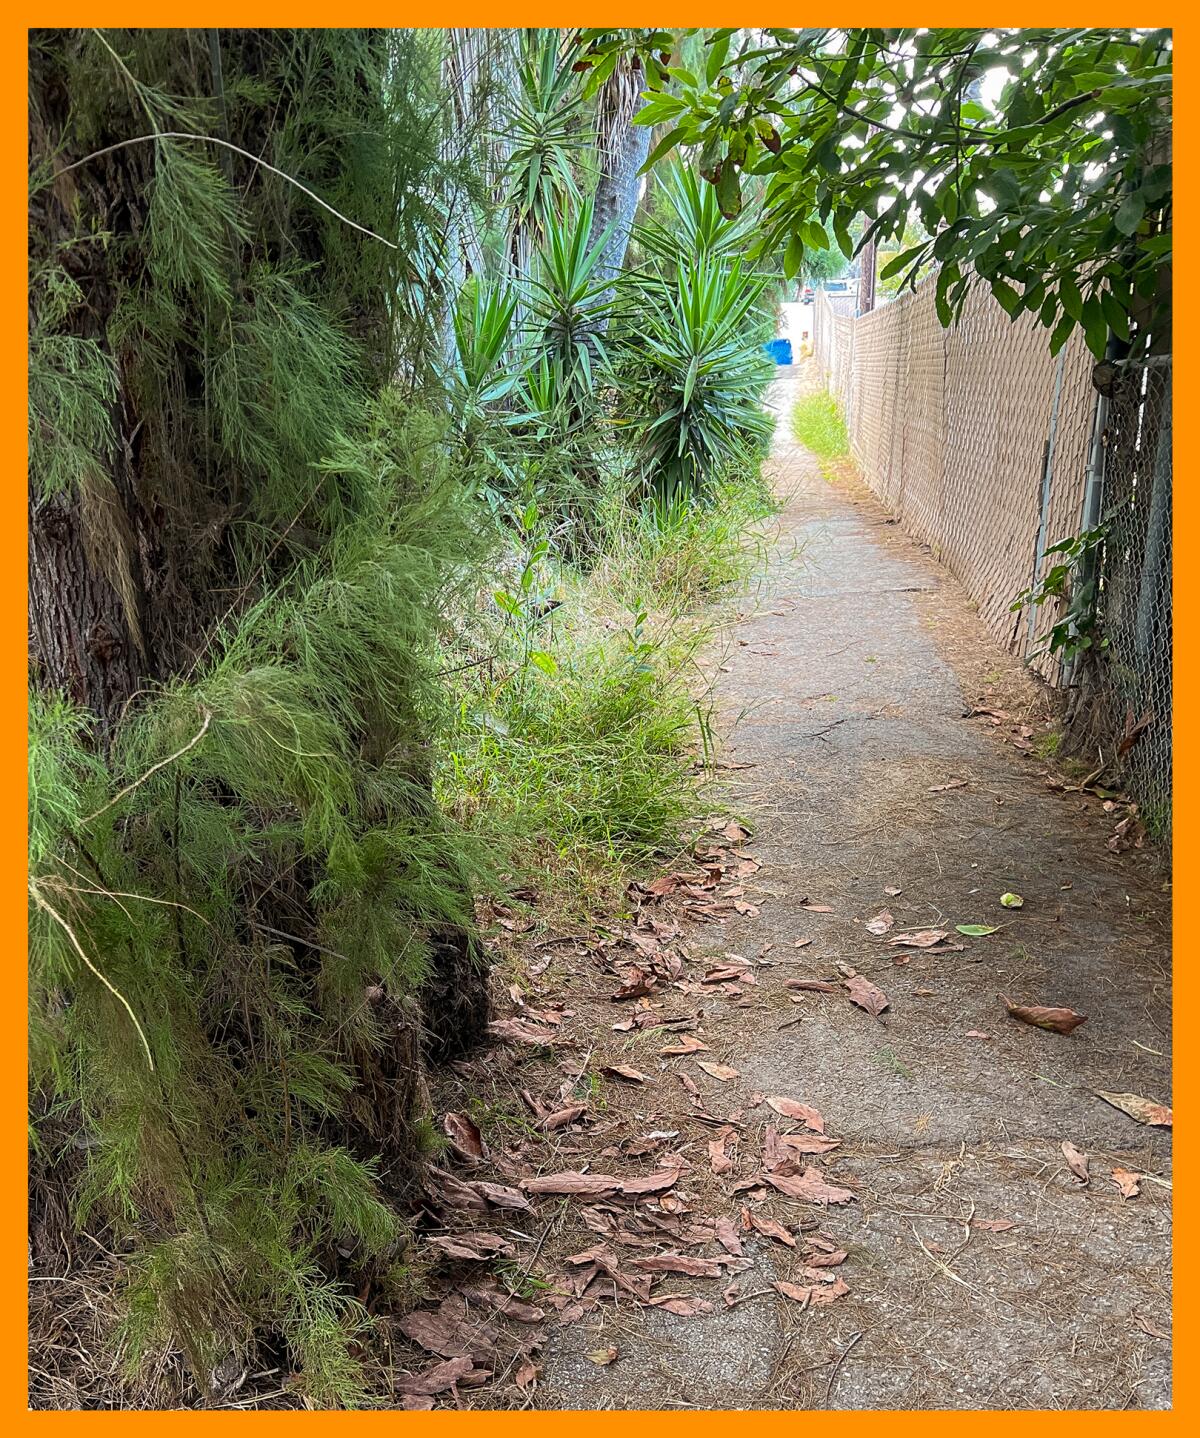 A narrow alley framed by leafy plants